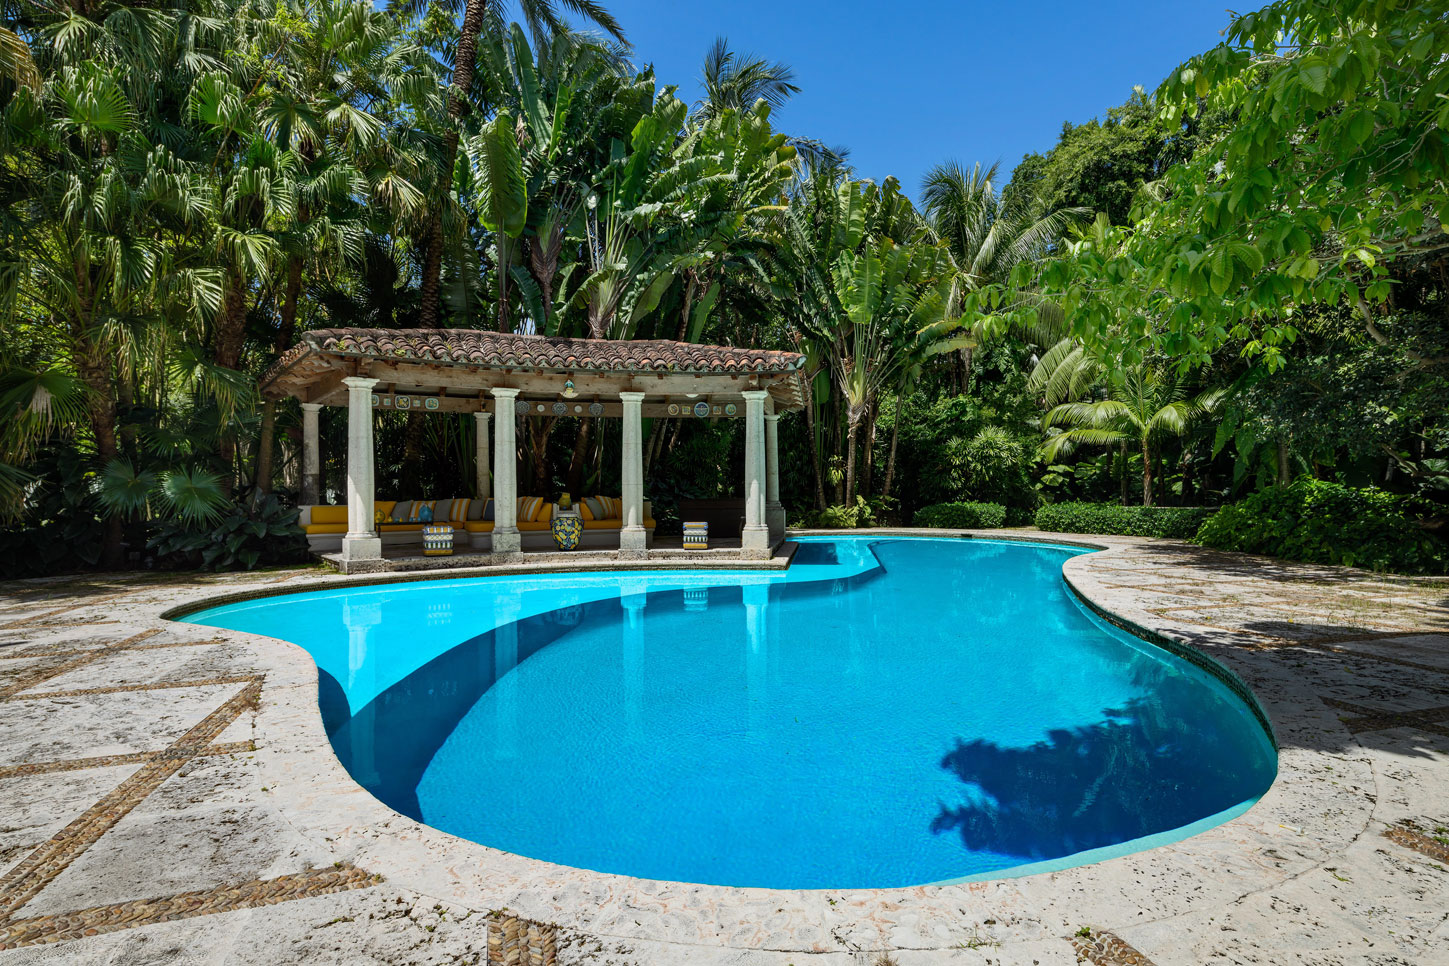 3725 Leafy Way, Coconut Grove, Miami, Florida, USA | Pool | Listed by Dennis Carvajal, Real Estate Agent, ONE Sotheby's International Realty | Finest Residences